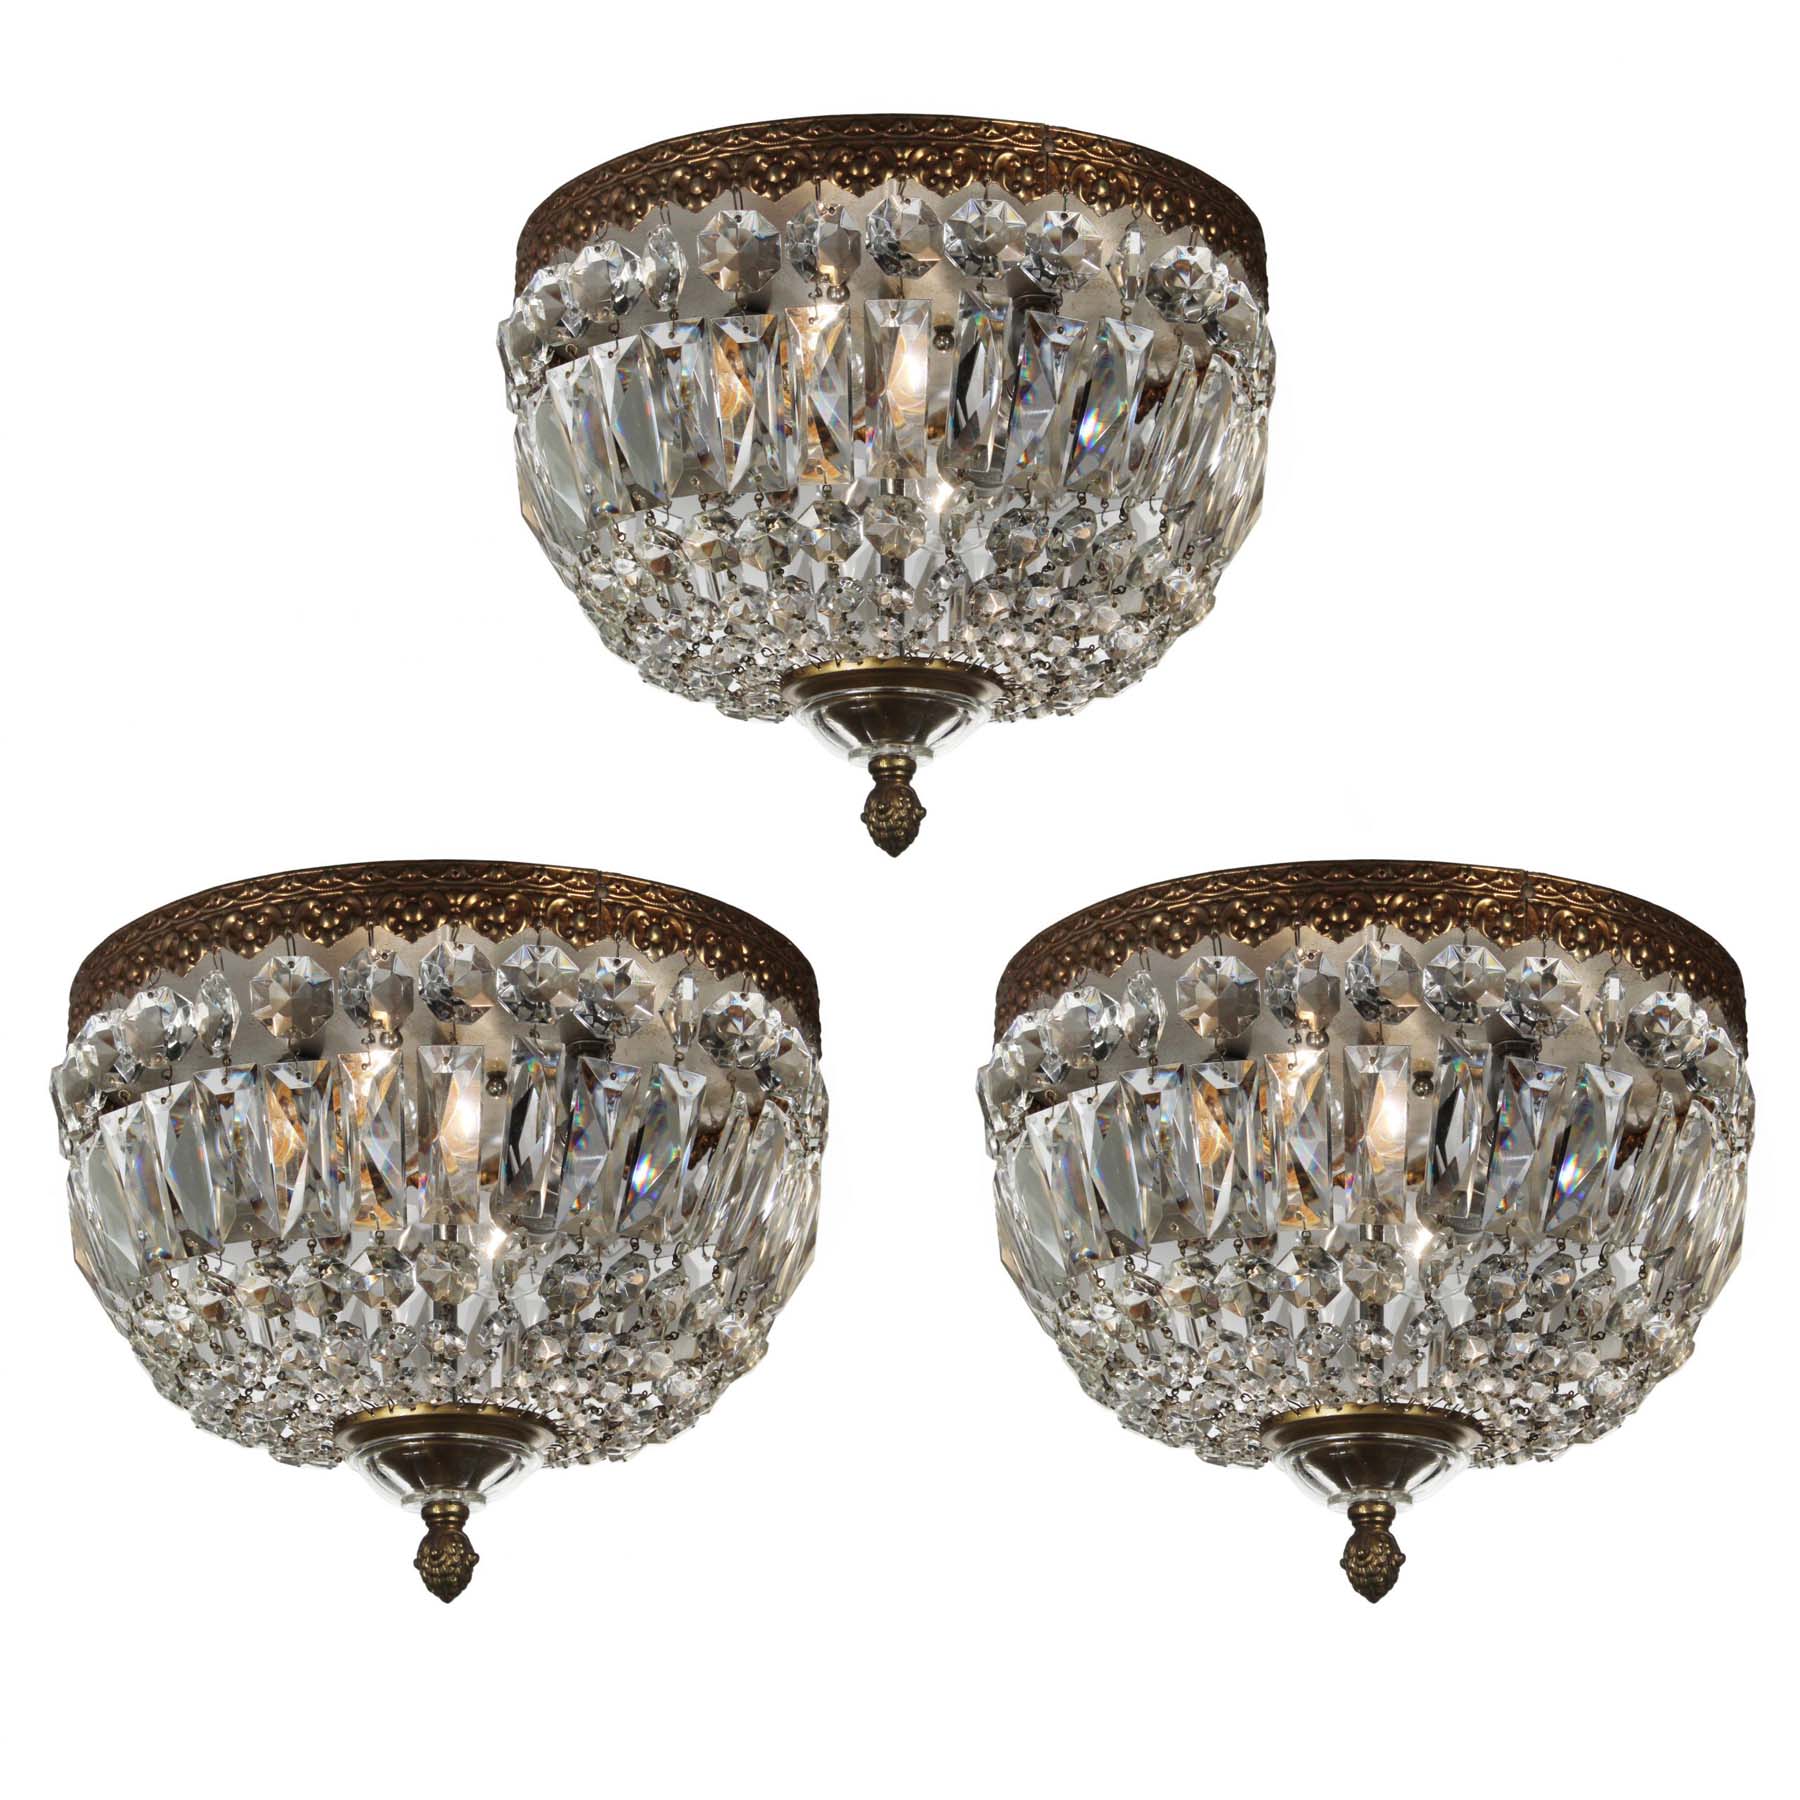 SOLD Antique Flush-Mount Beaded Basket Chandeliers with Prisms-0